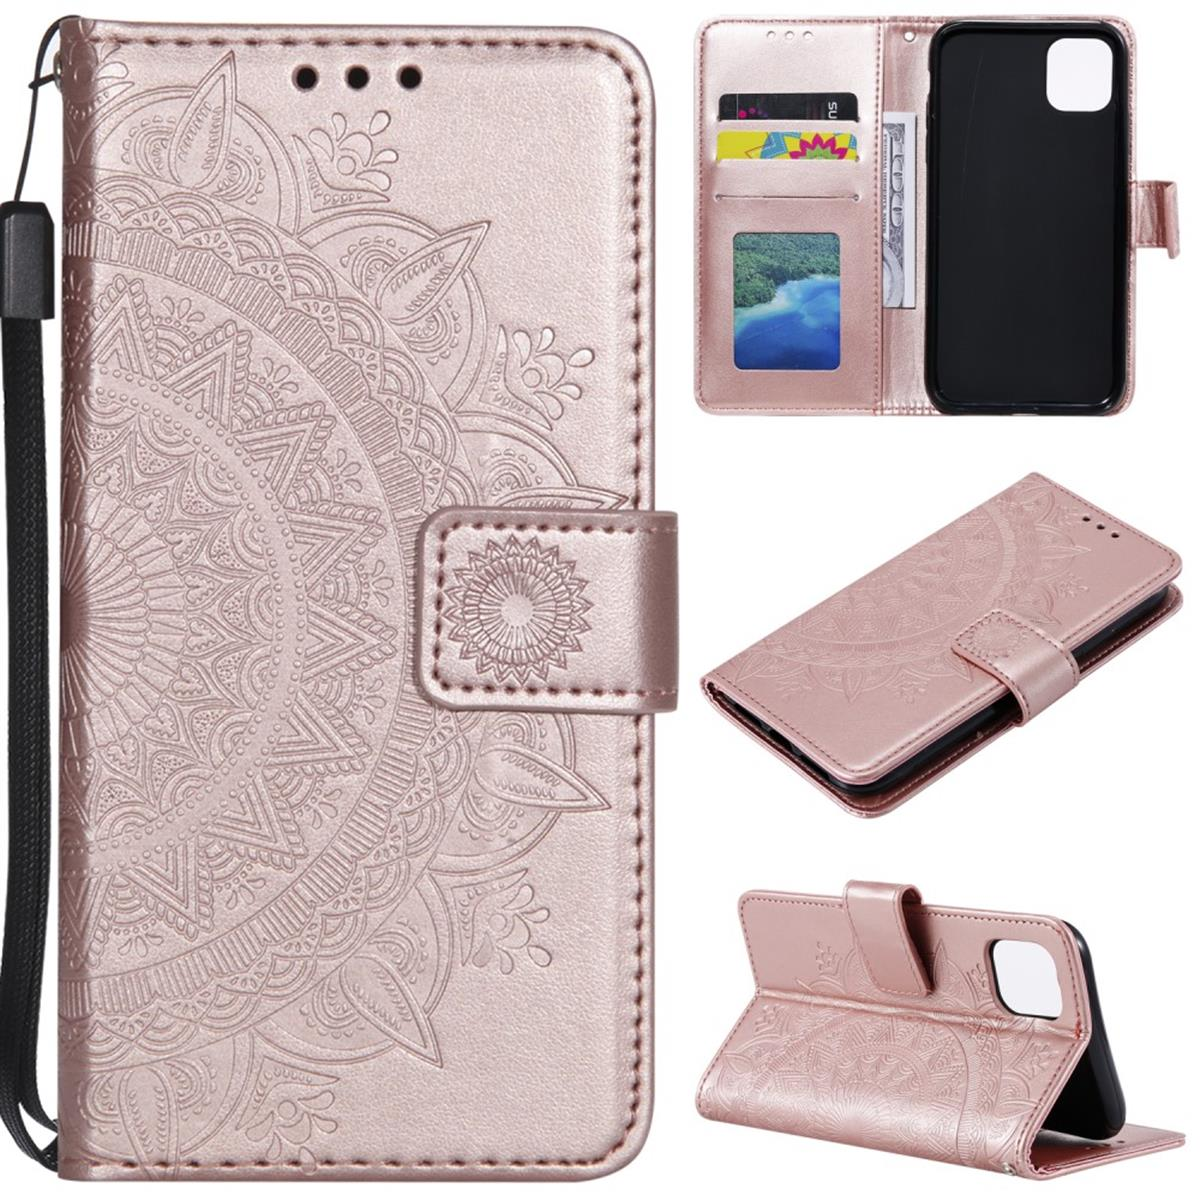 COVERKINGZ Klapphülle mit Mandala Muster, A22 Galaxy 5G, Bookcover, Samsung, Roségold